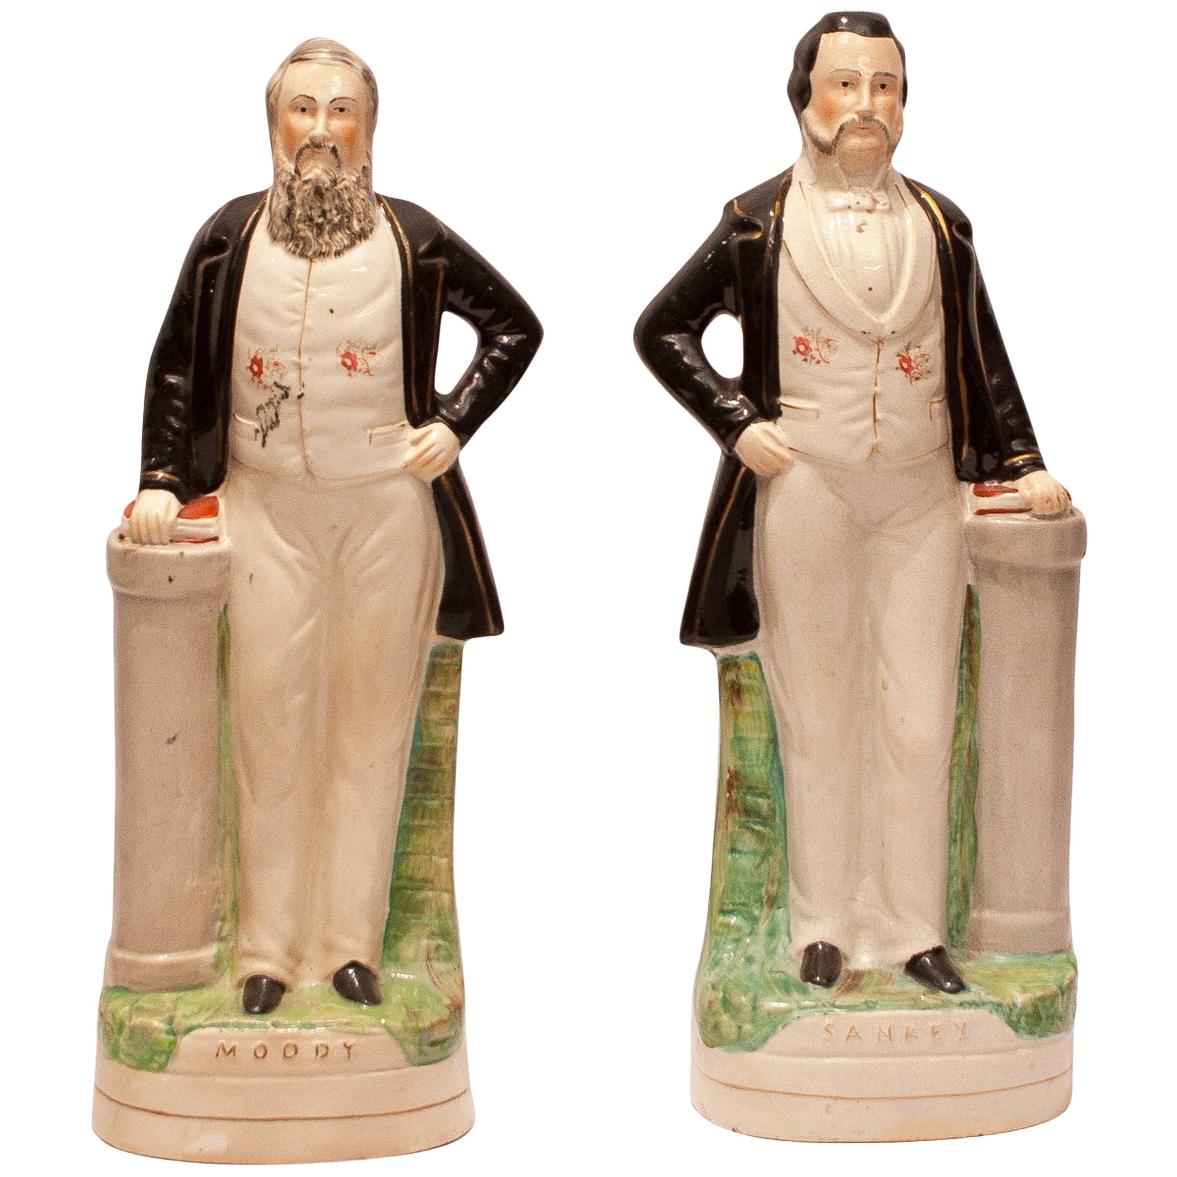 Pair of Staffordshire Figures, Moody and Sankey, England, circa 1860